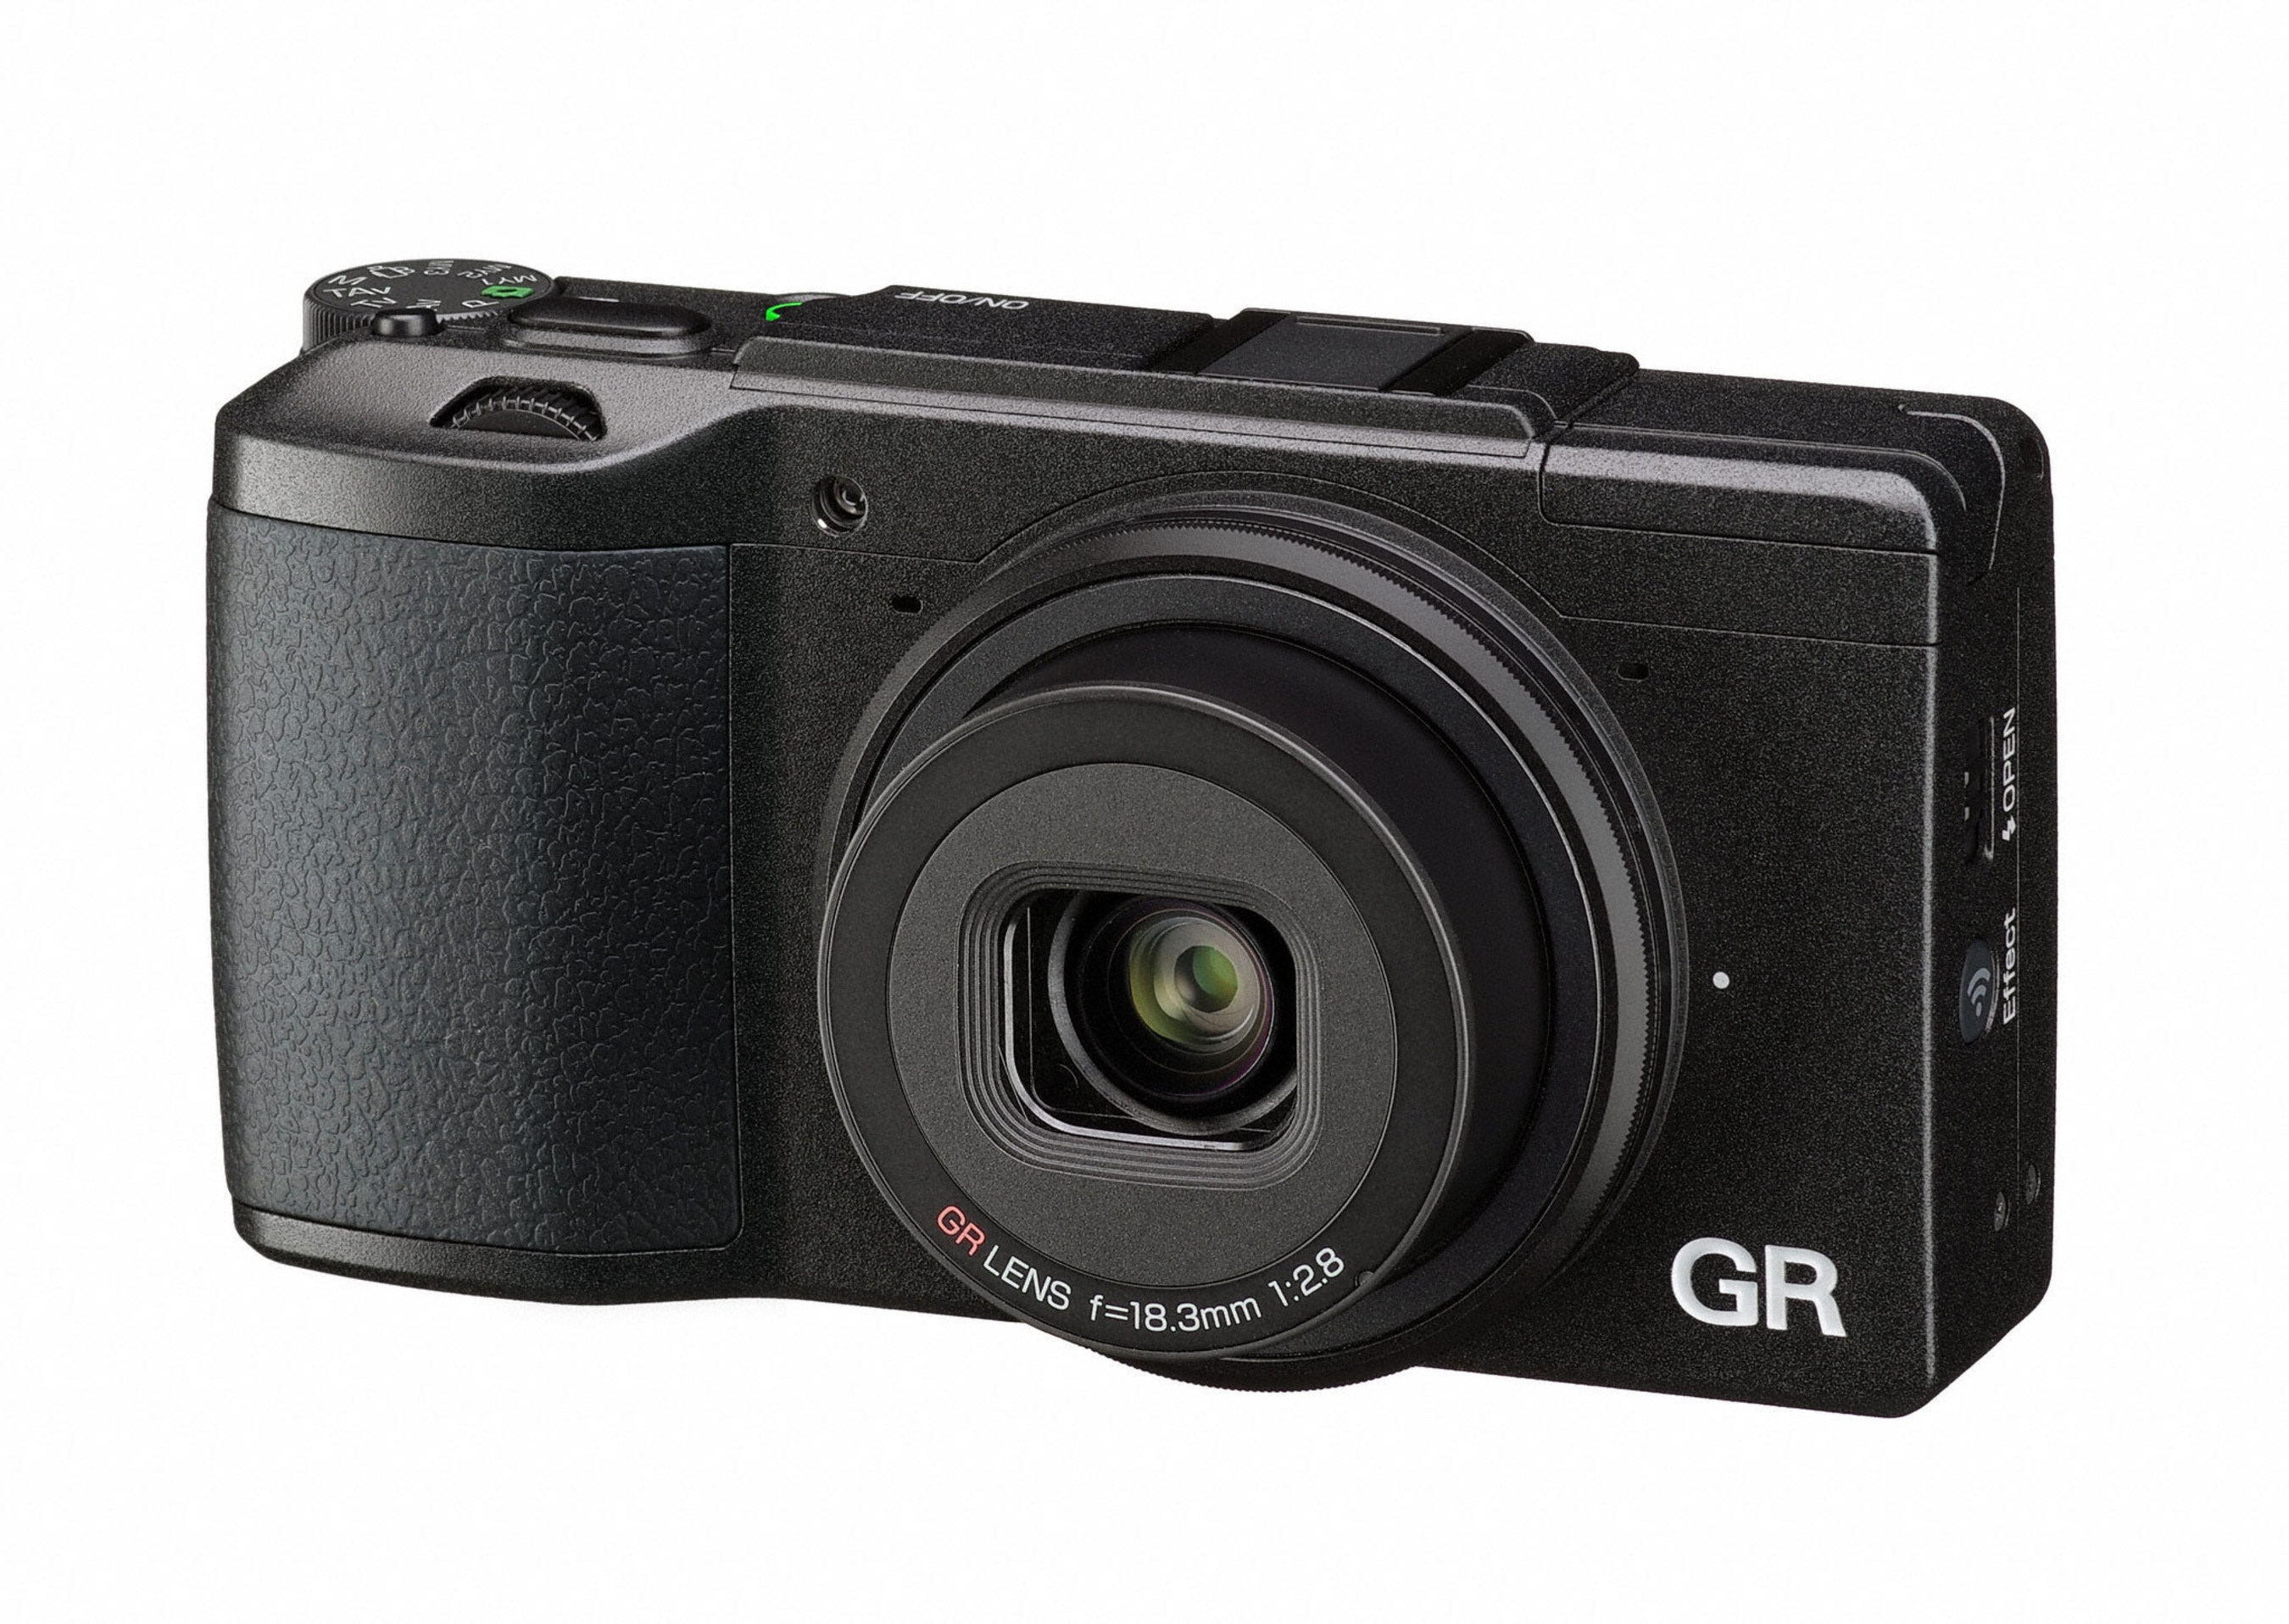 Ricoh Unveils GR II, its Newest Premium Compact Camera, Featuring Wi-Fi and NFC Capabilities